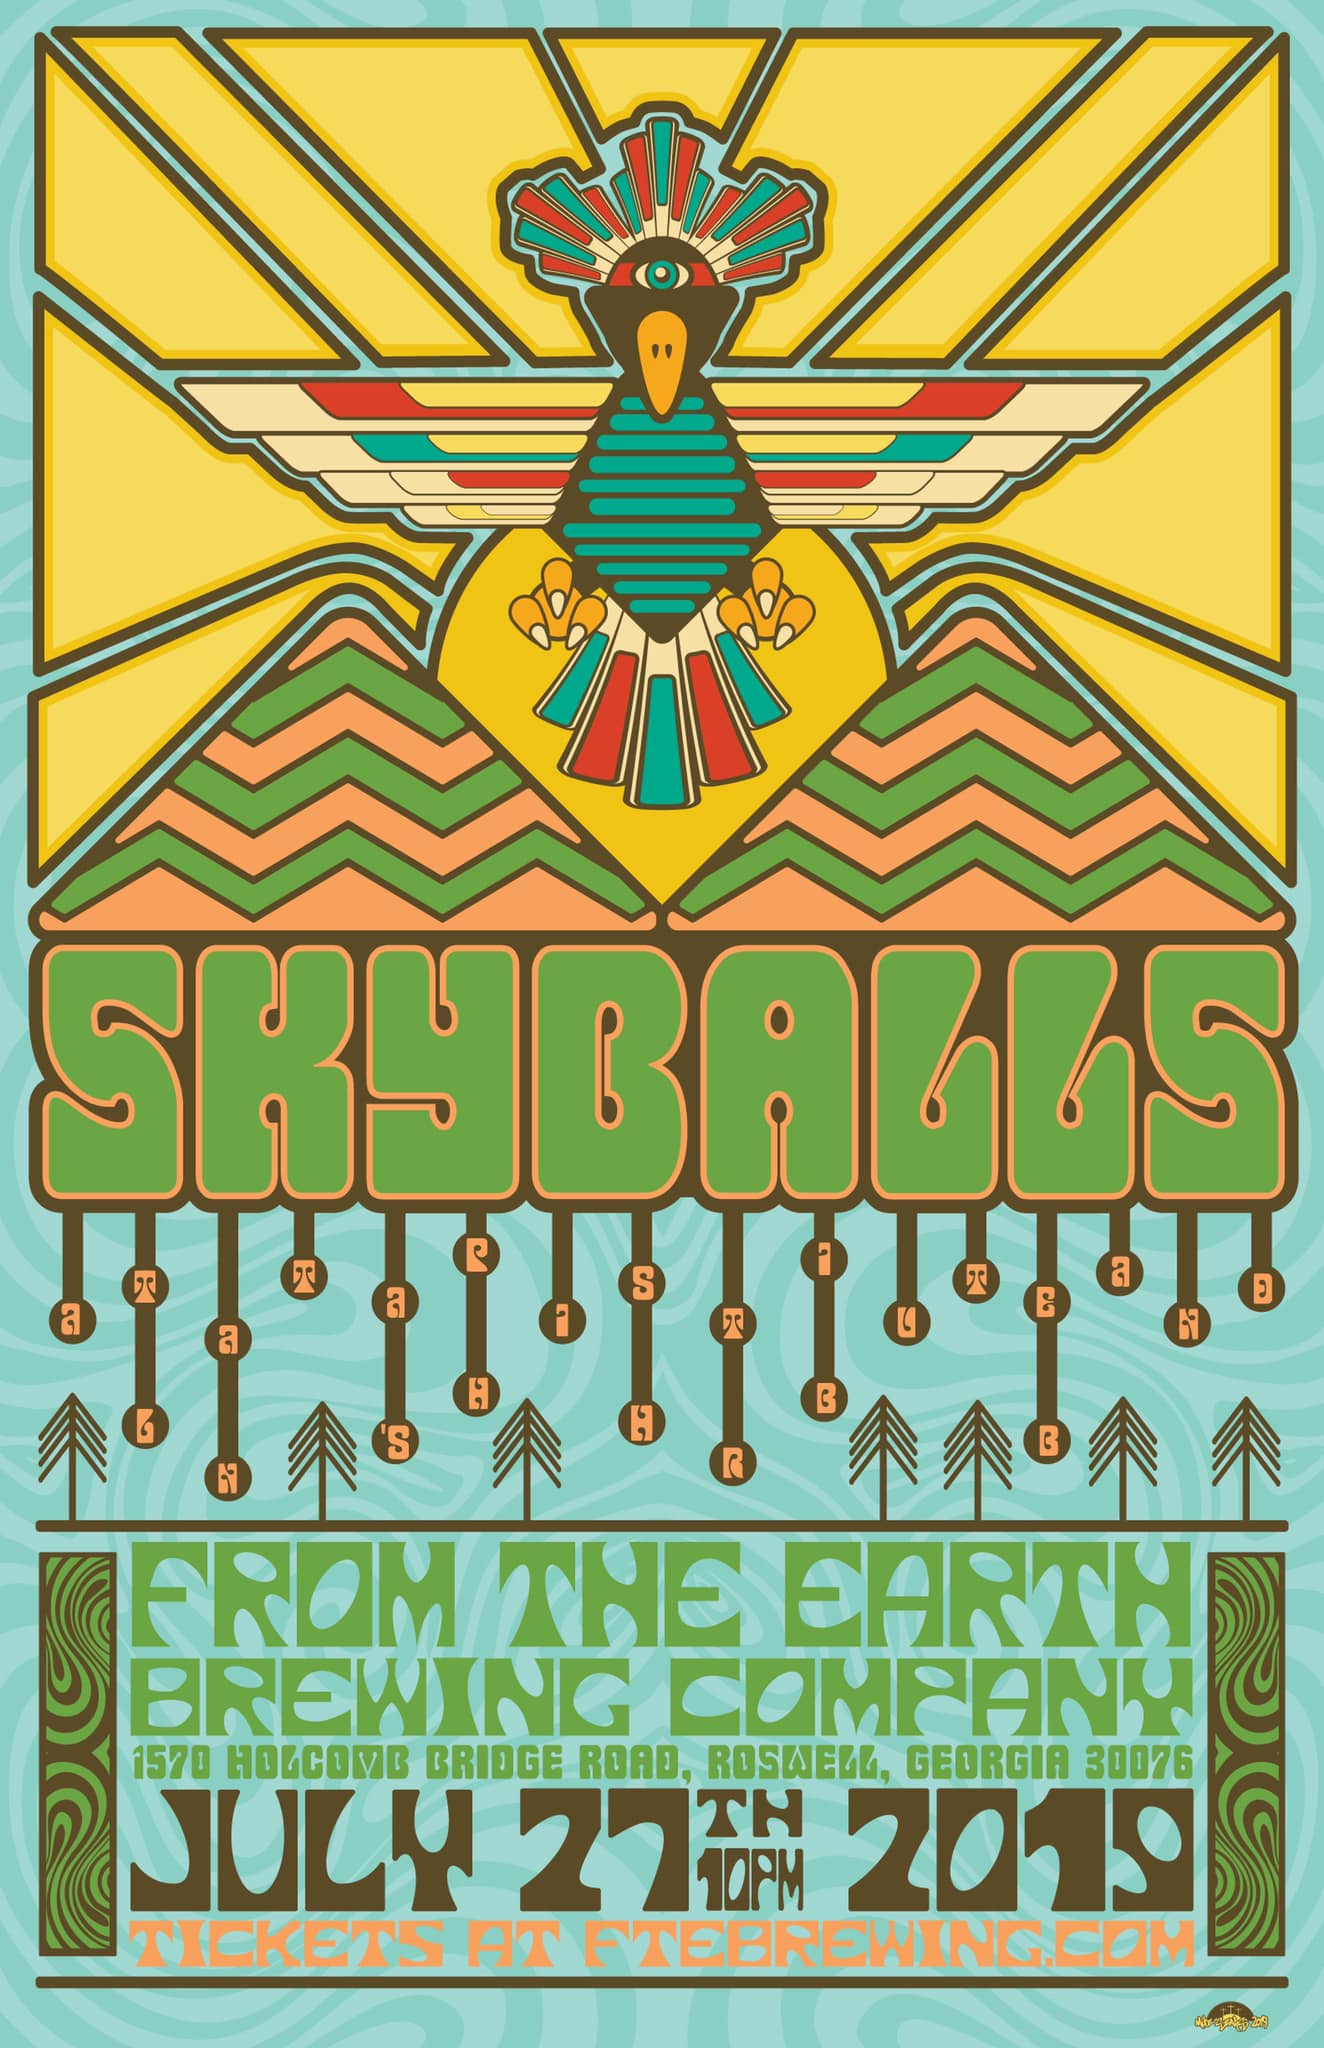 FTE Welcomes Skyballs: Atlanta's Phish Tribute Band @ Mike Sears